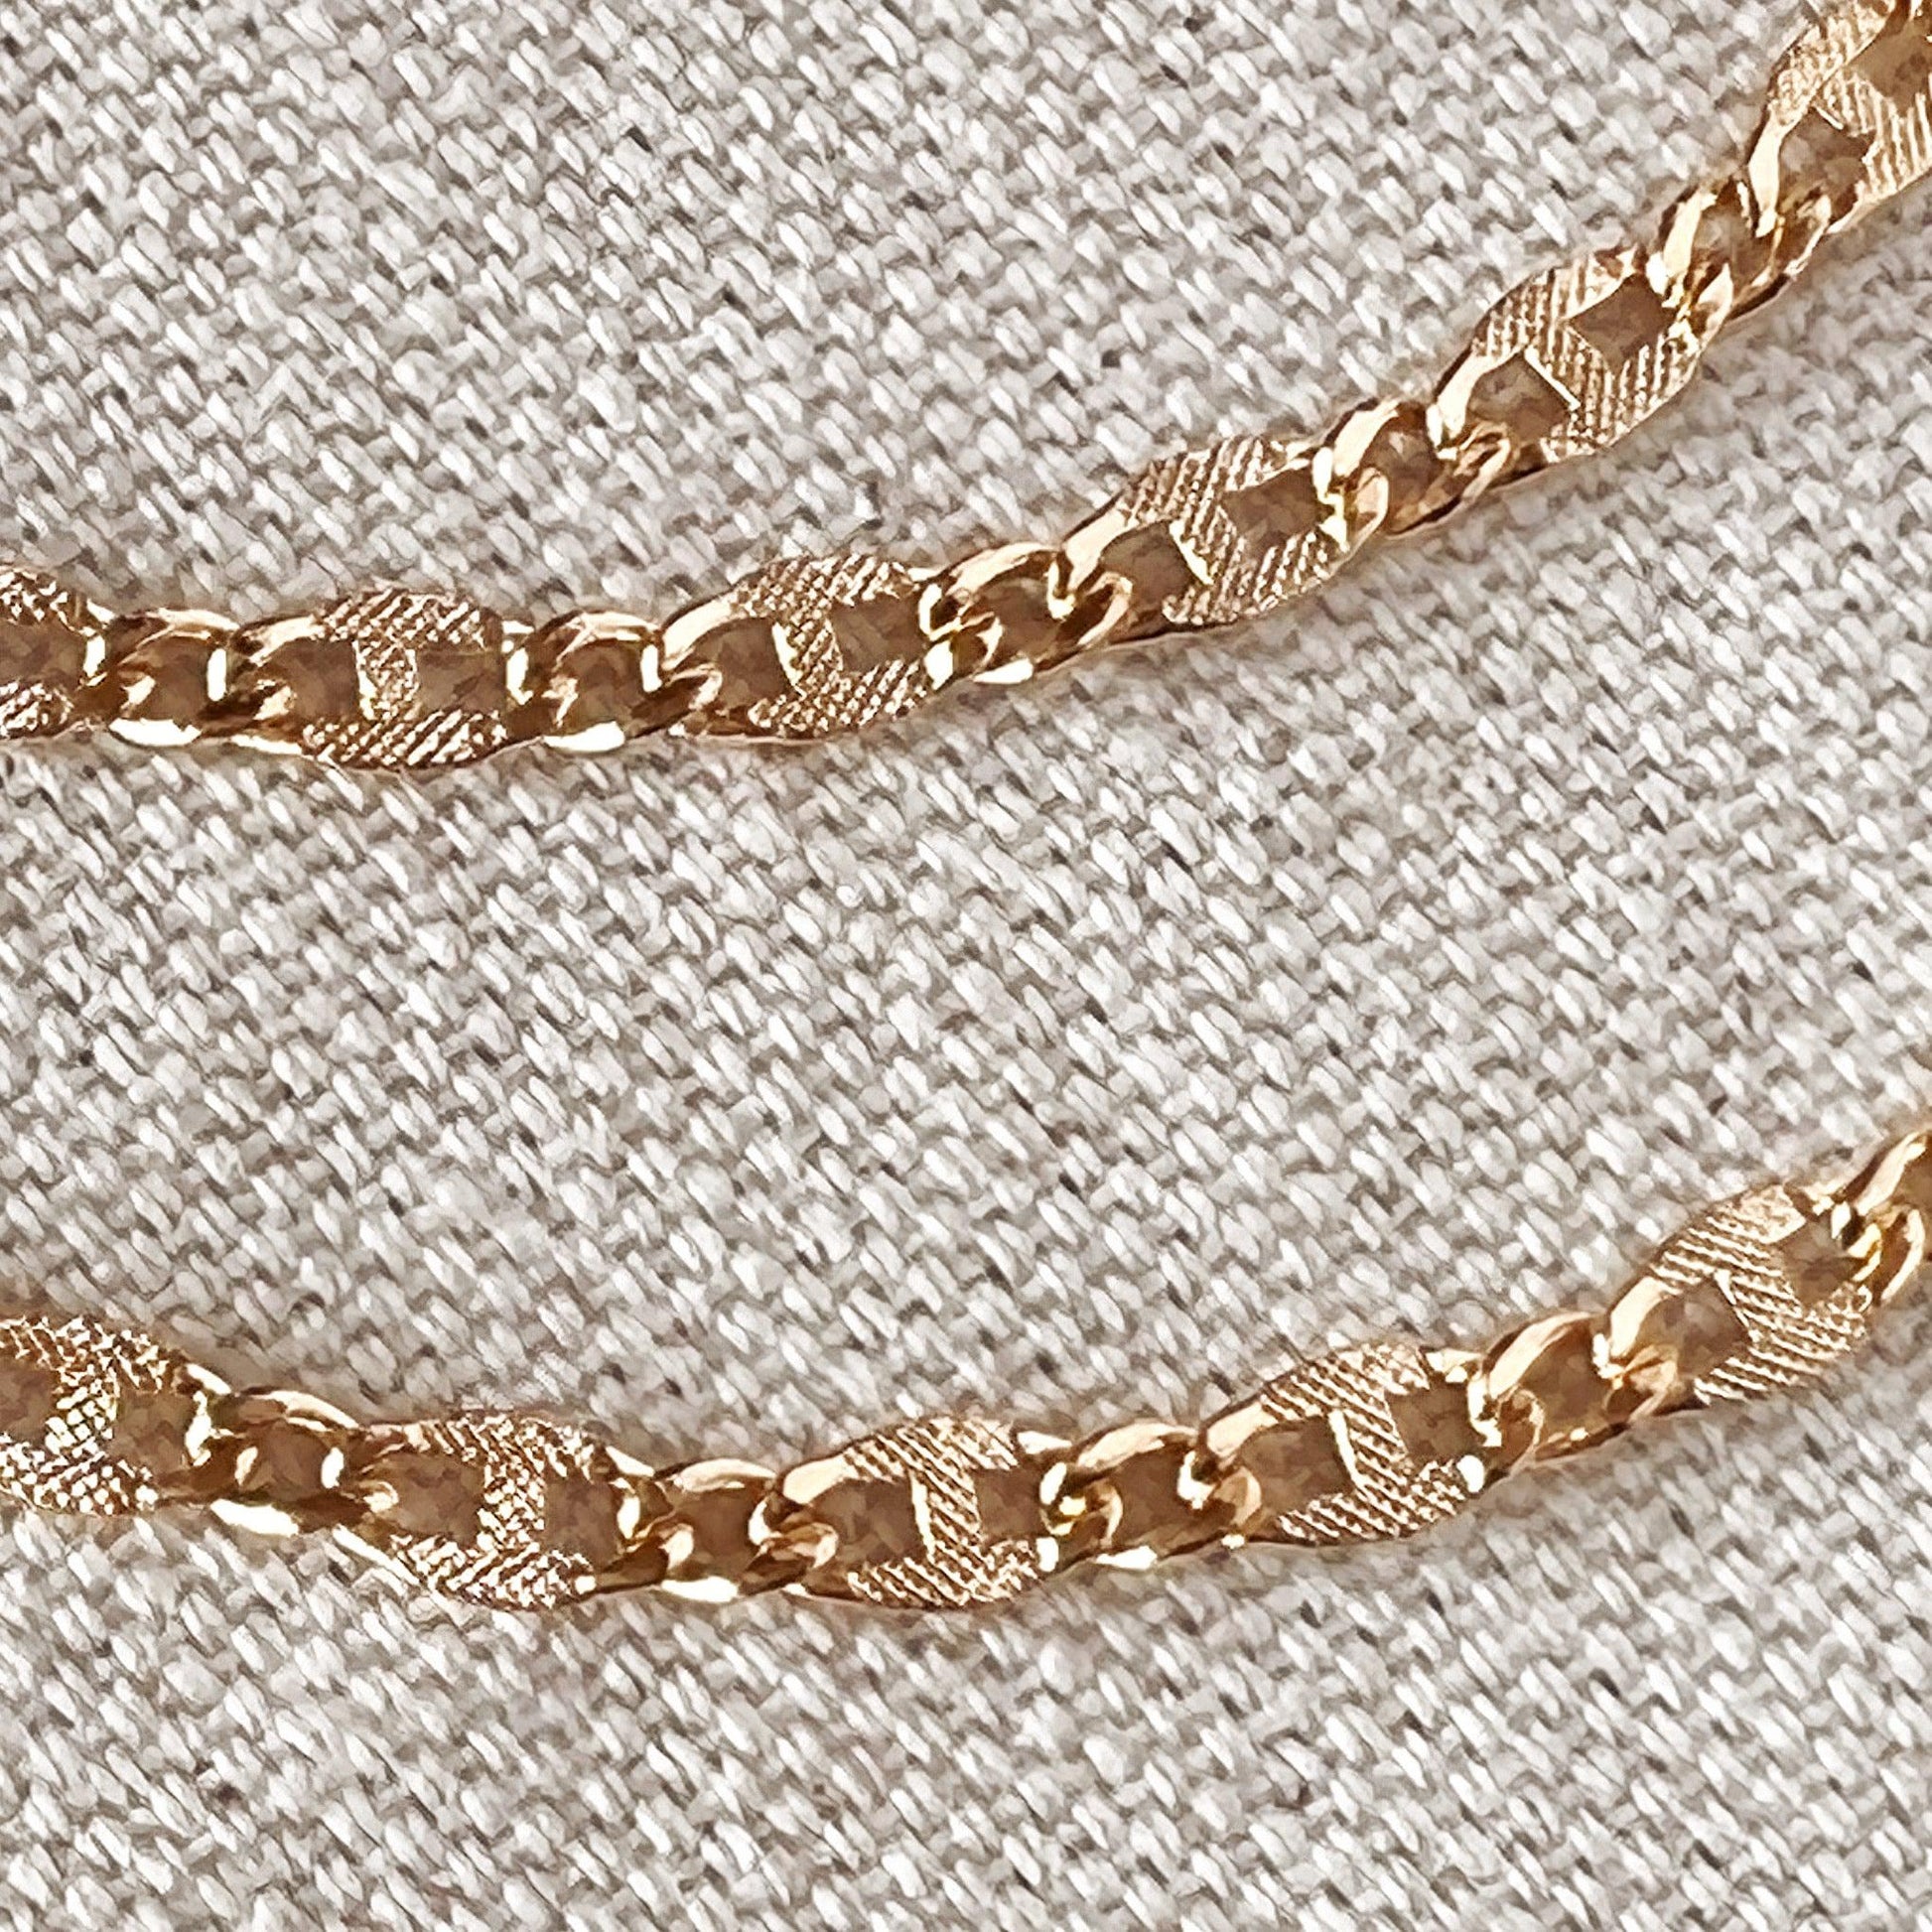 GoldFi 18k Gold Filled Detailed Chain Jewelry